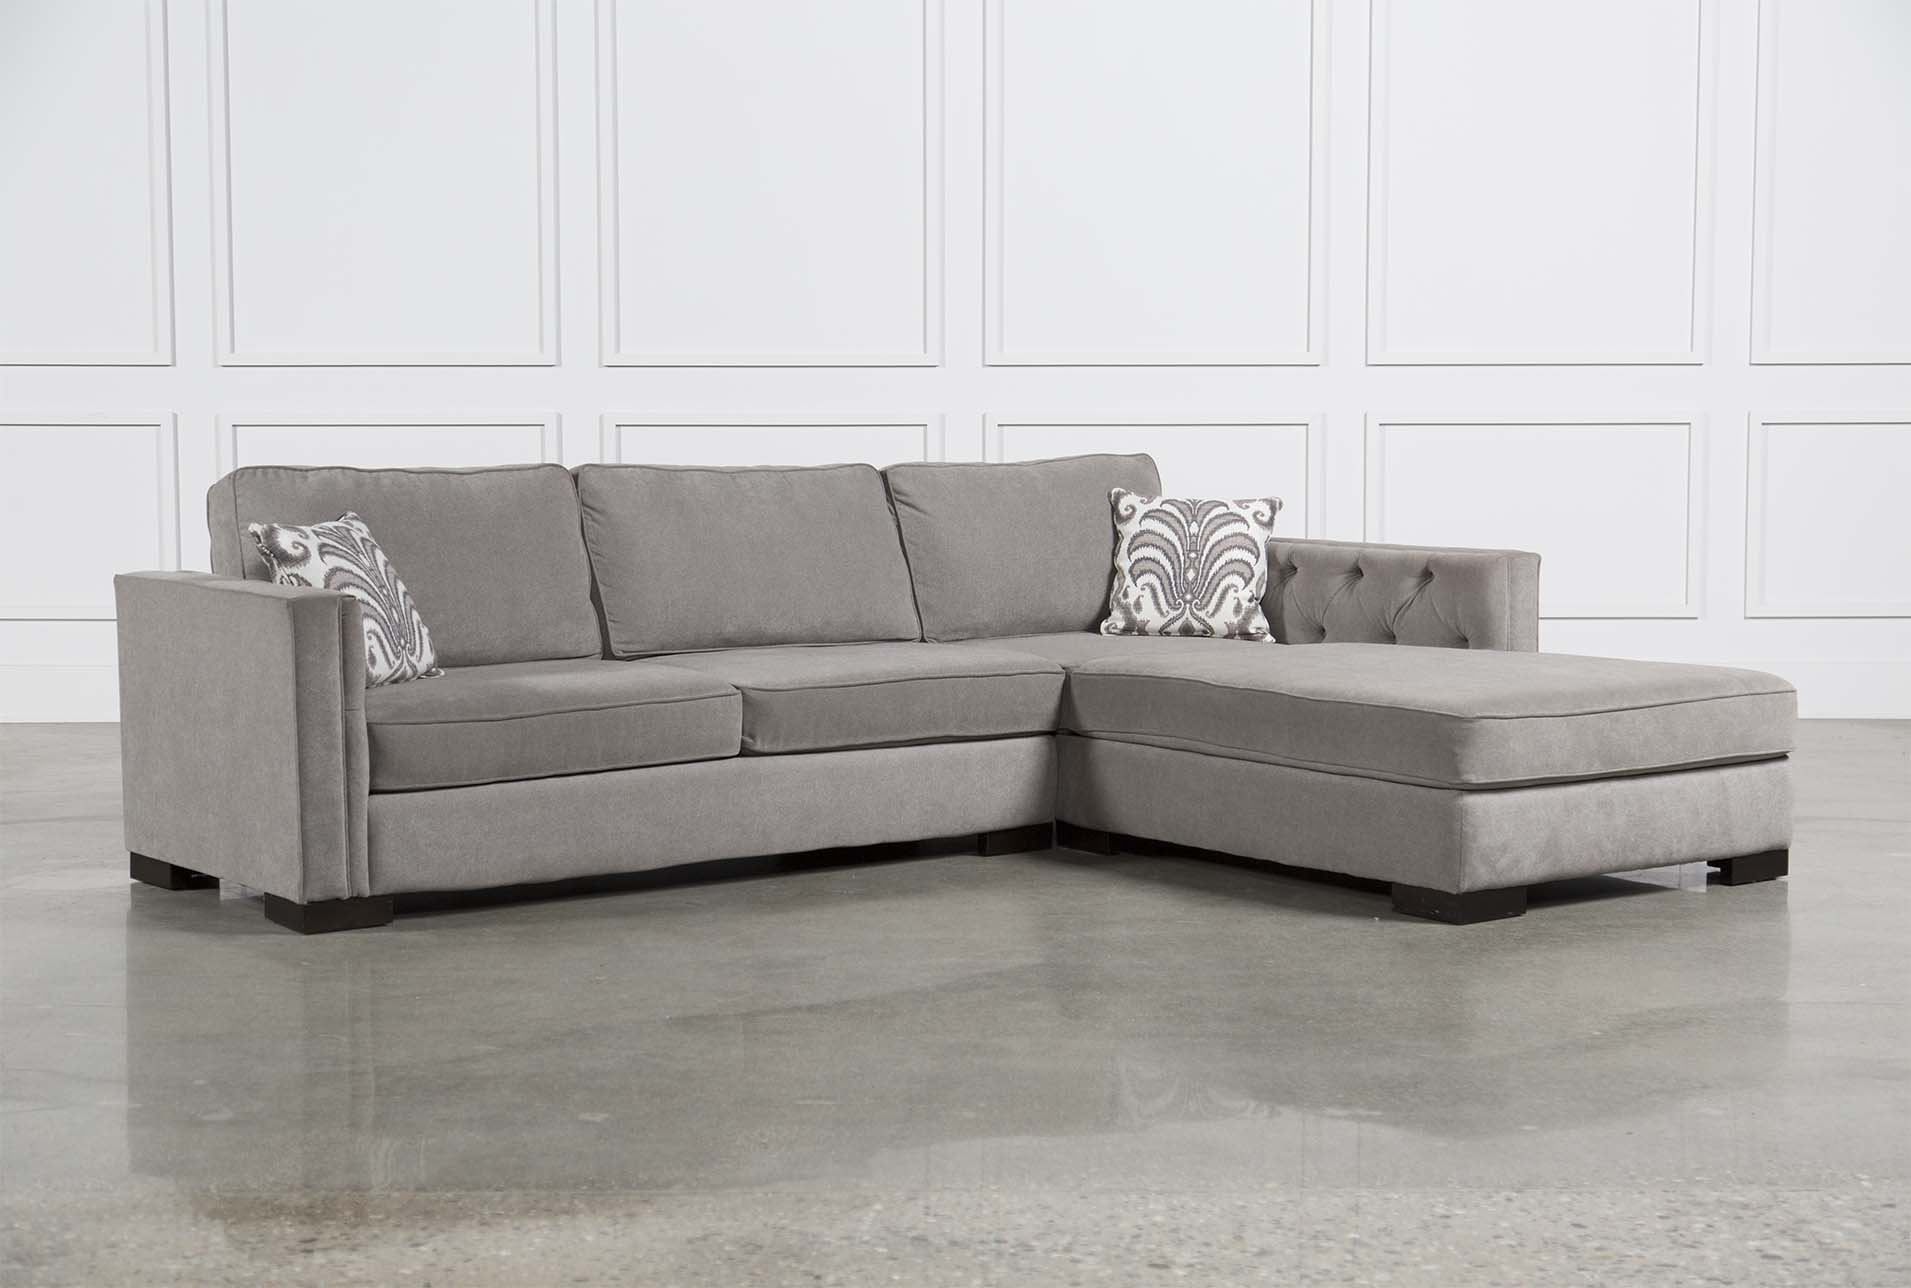 Sectional Sofas Living Spaces 51 With Sectional Sofas Living Spaces For Living Spaces Sectional Sofas (View 2 of 10)